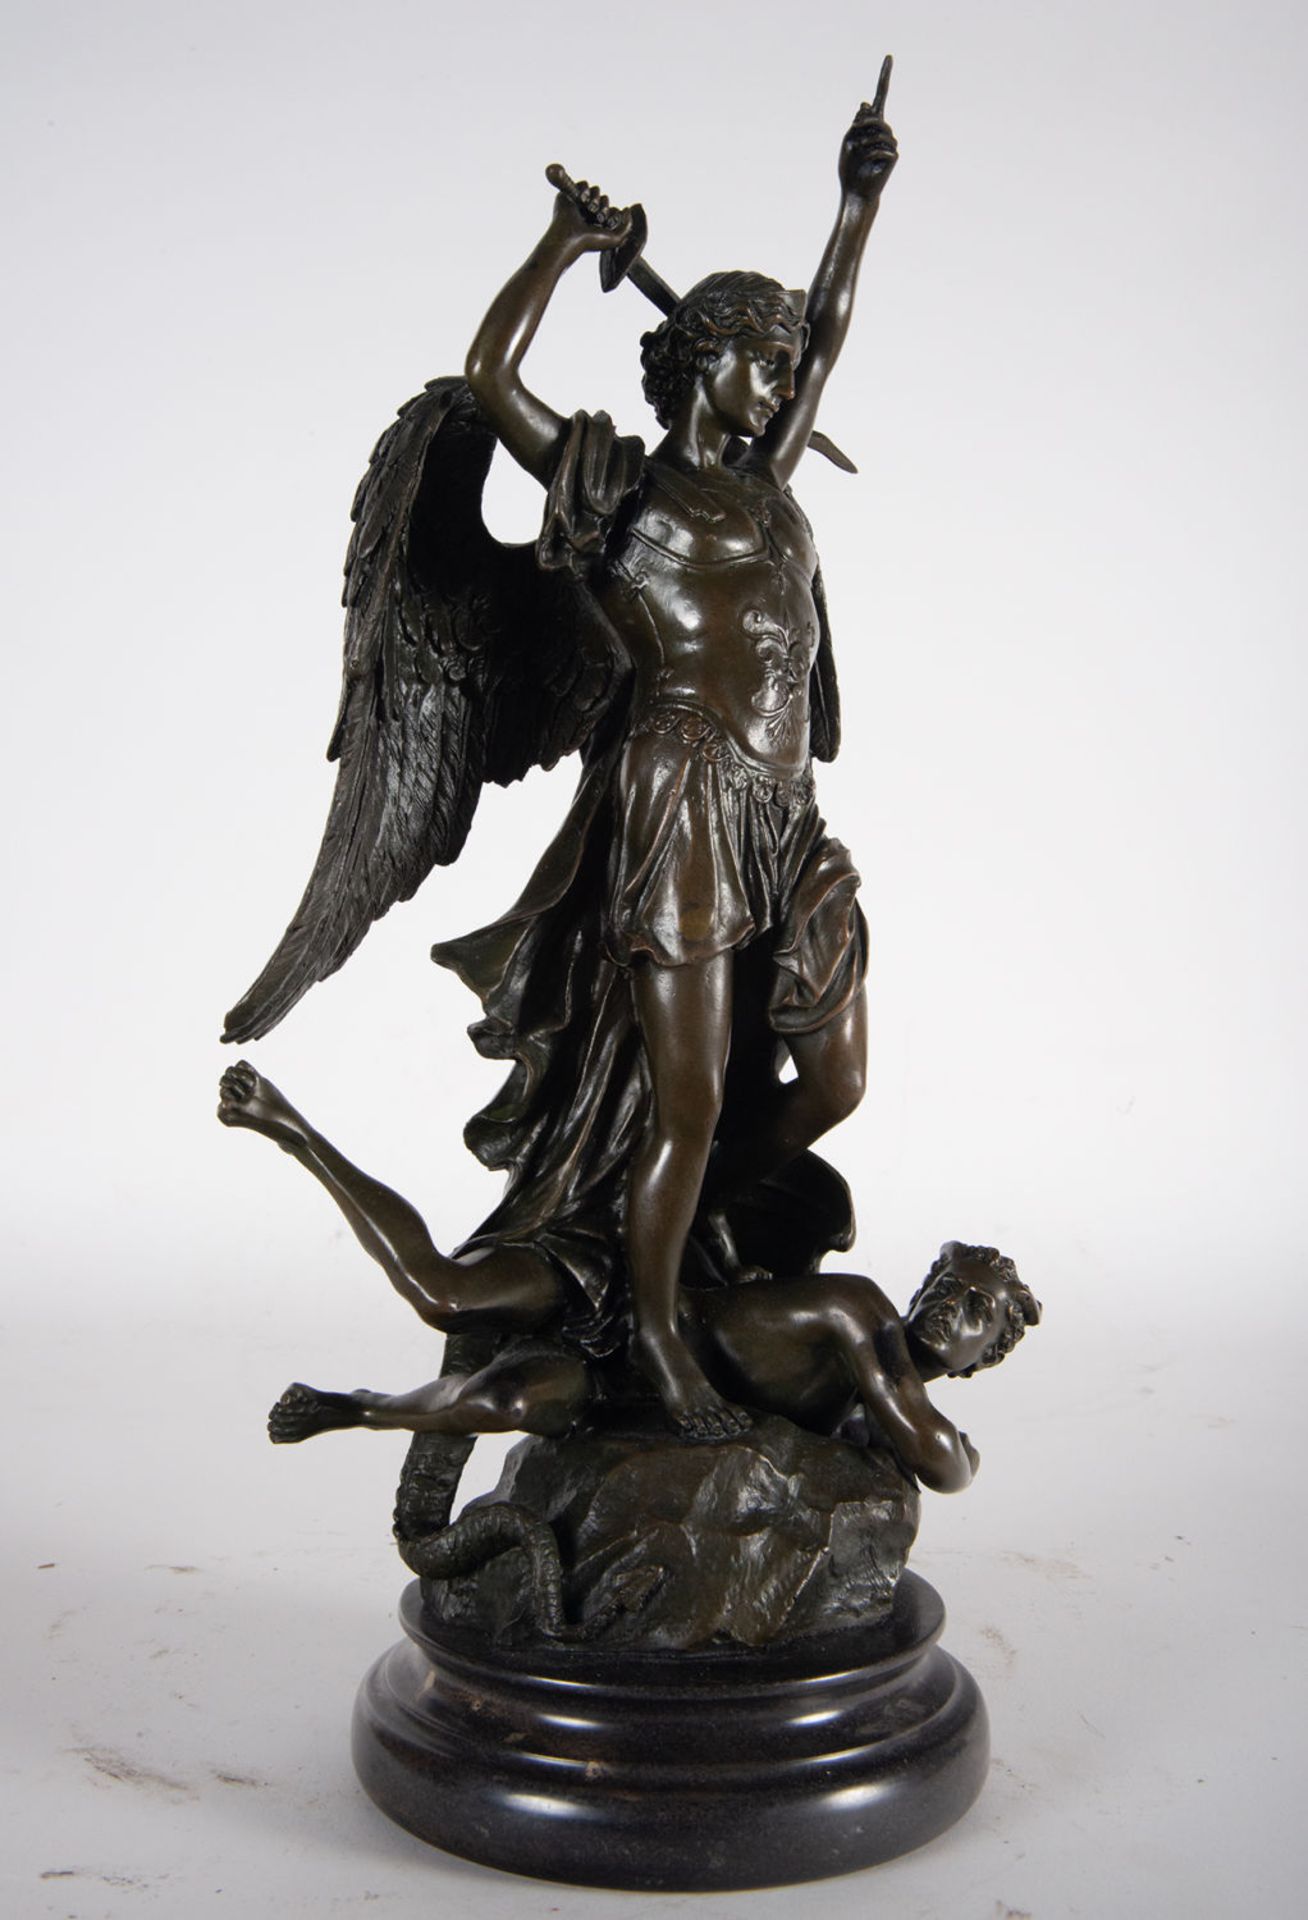 Saint Michael the Archangel Defeating the Evil One in patinated bronze, XIX - XX Centuries - Image 3 of 6